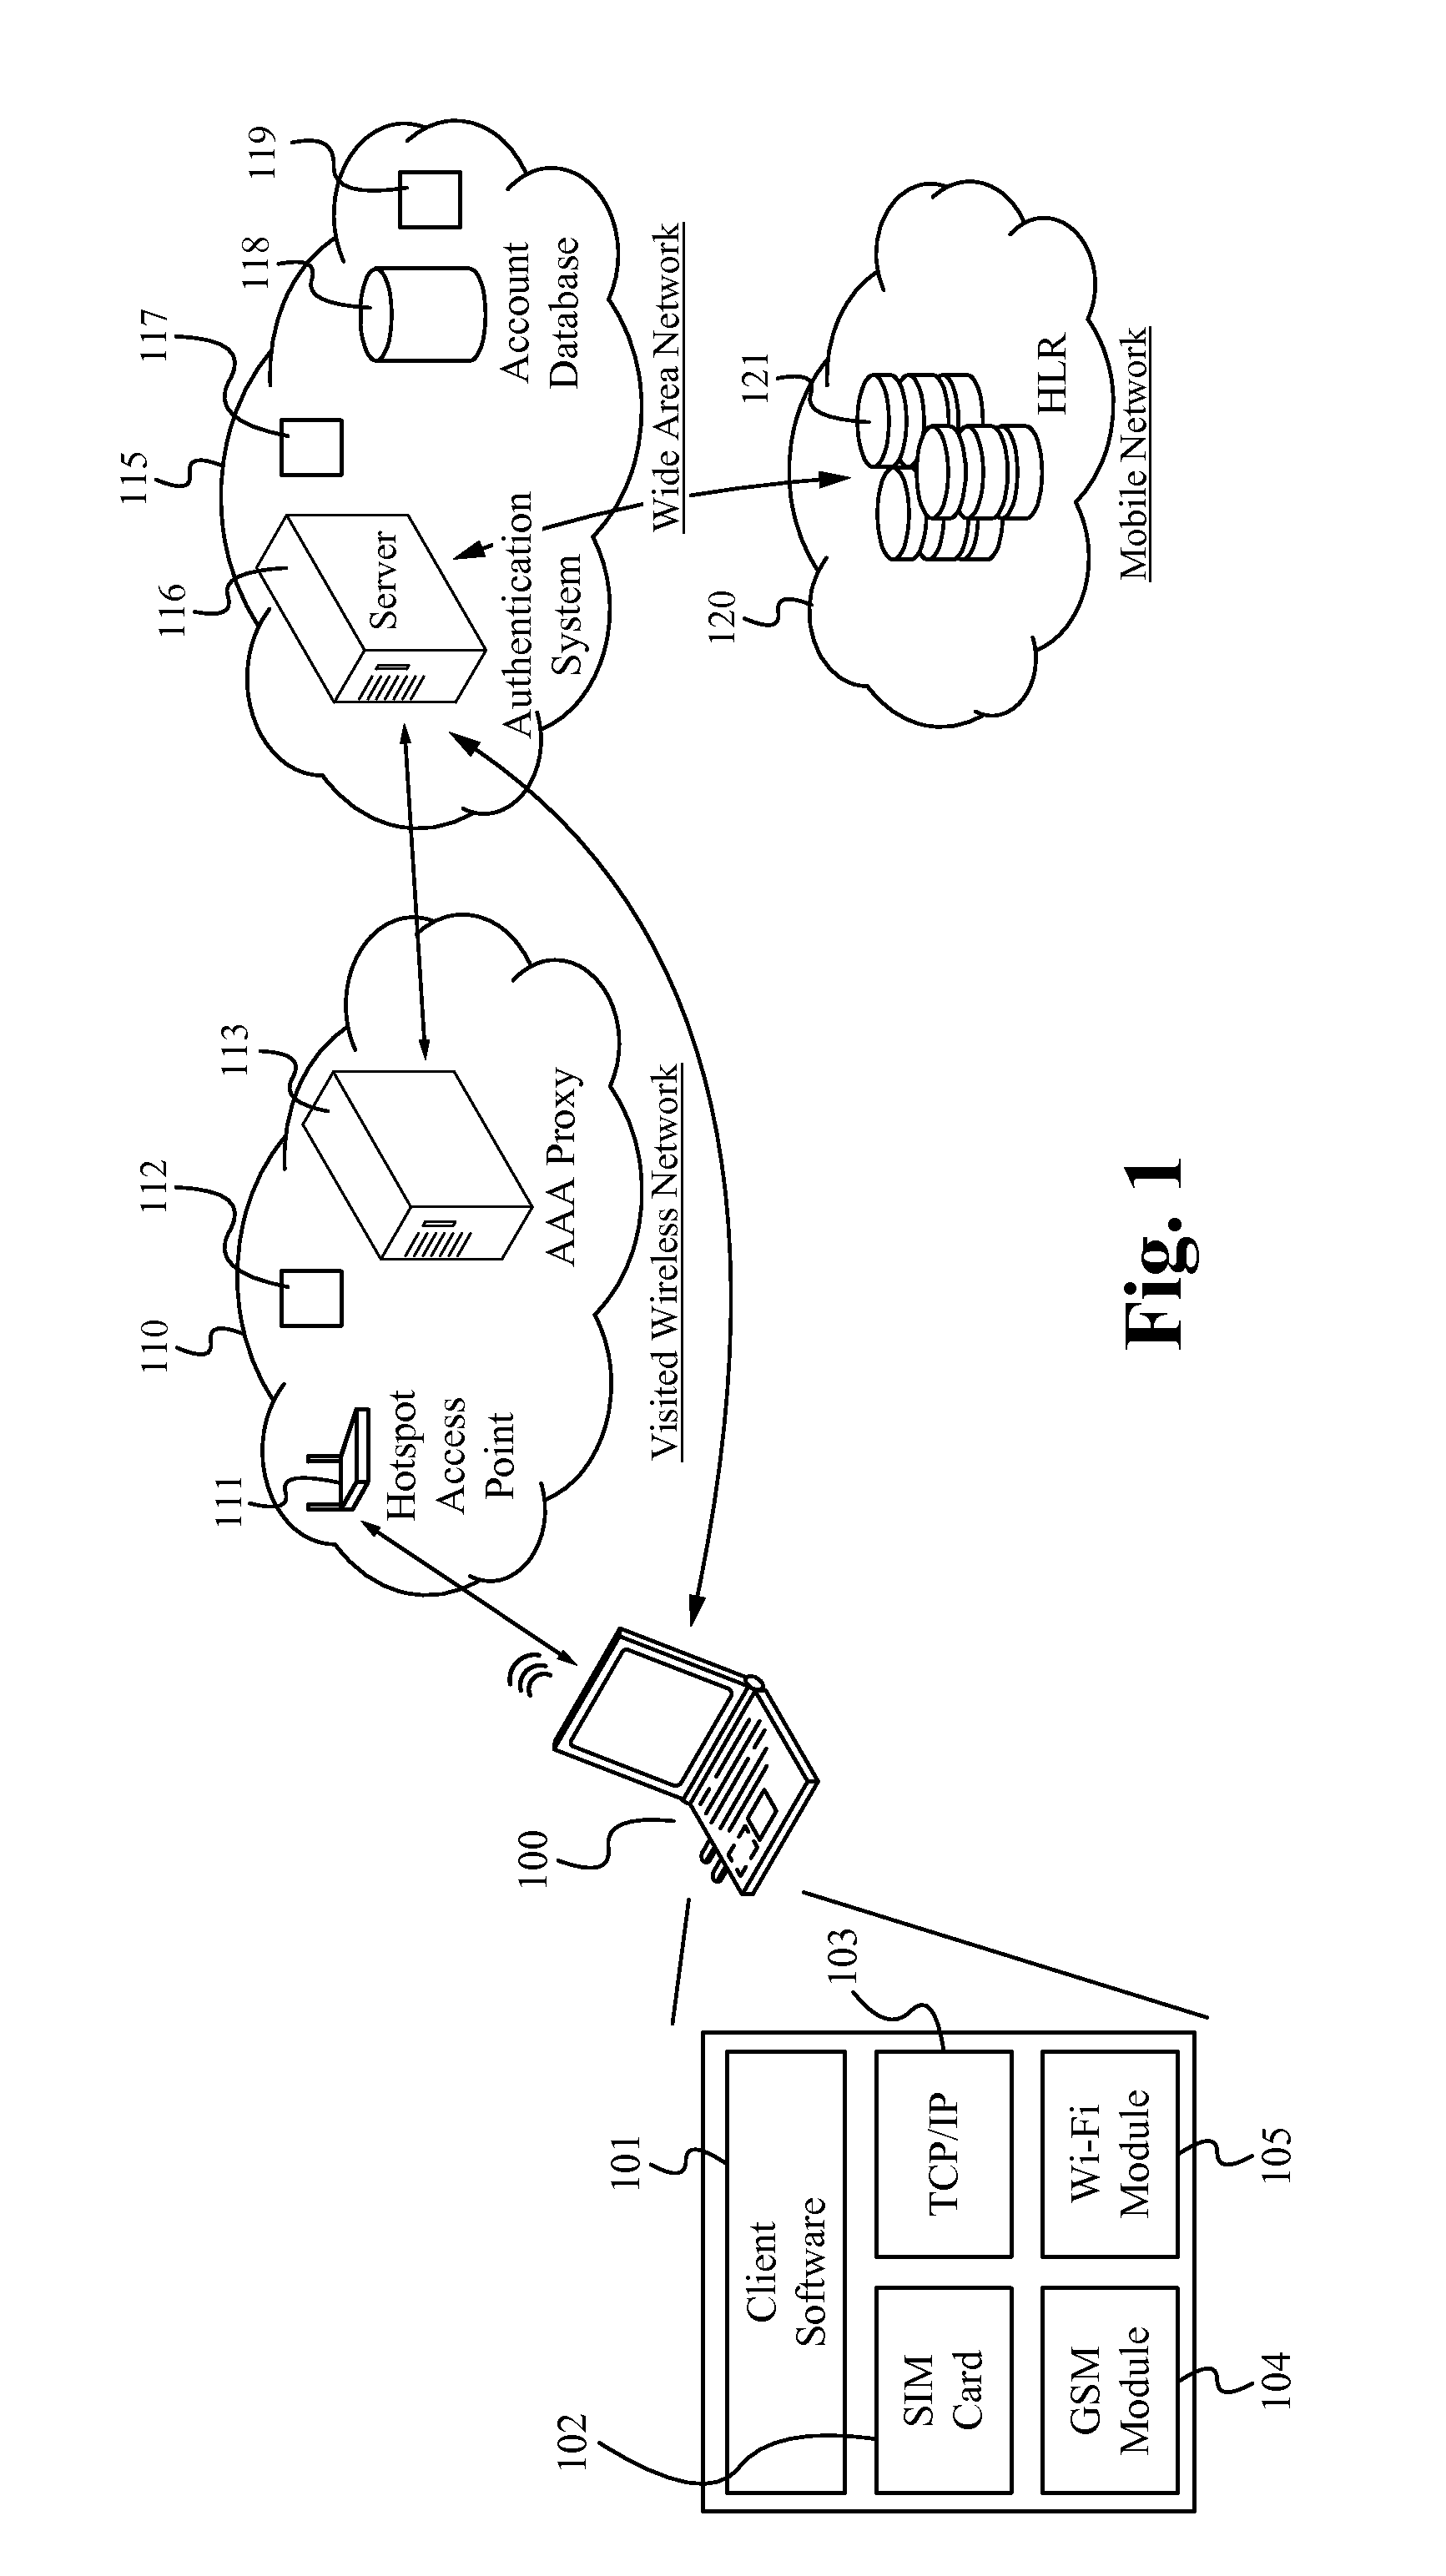 METHOD OF AND SYSTEM FOR EXTENDING THE WISPr AUTHENTICATION PROCEDURE